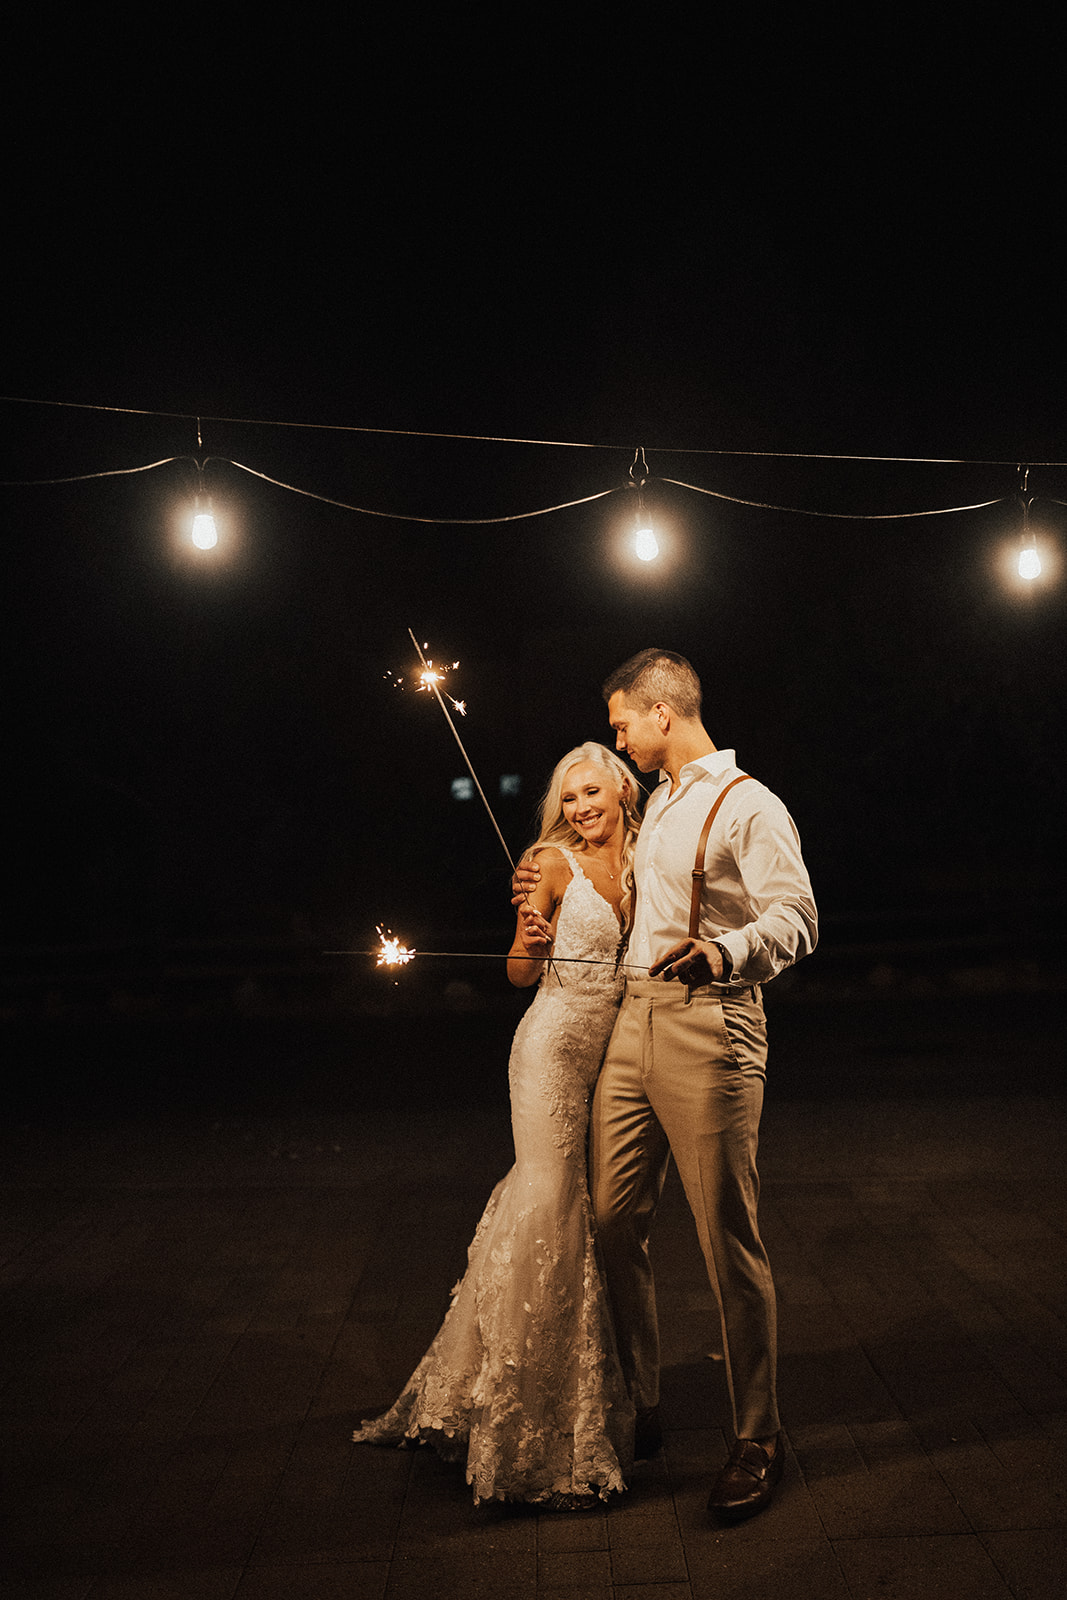 Unique ways to use sparklers at your wedding